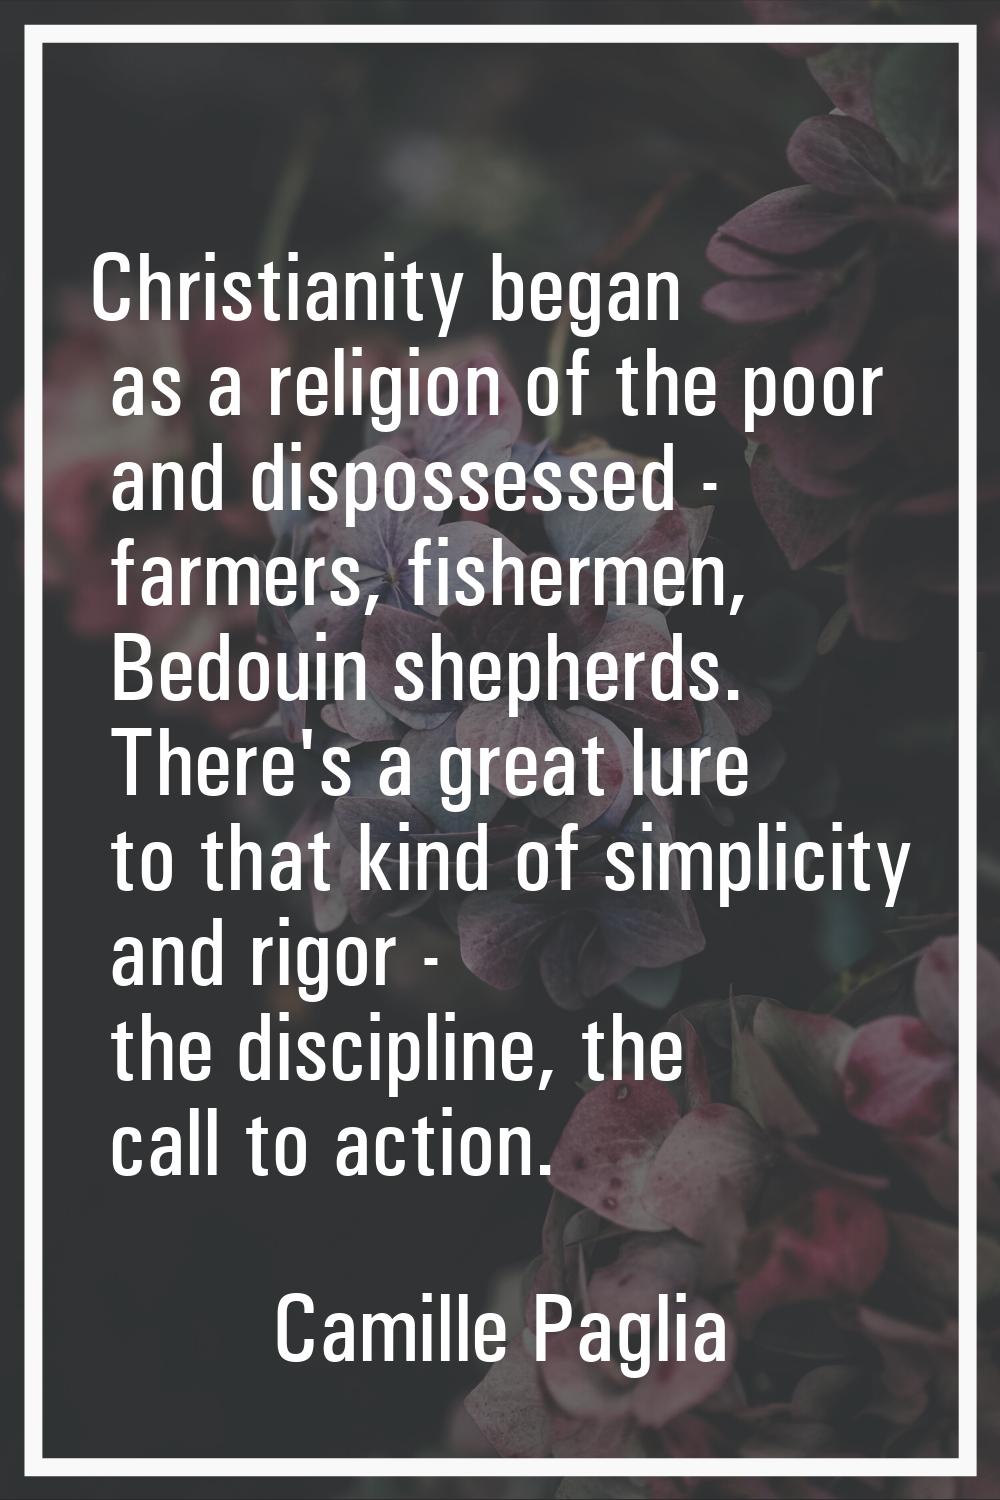 Christianity began as a religion of the poor and dispossessed - farmers, fishermen, Bedouin shepher